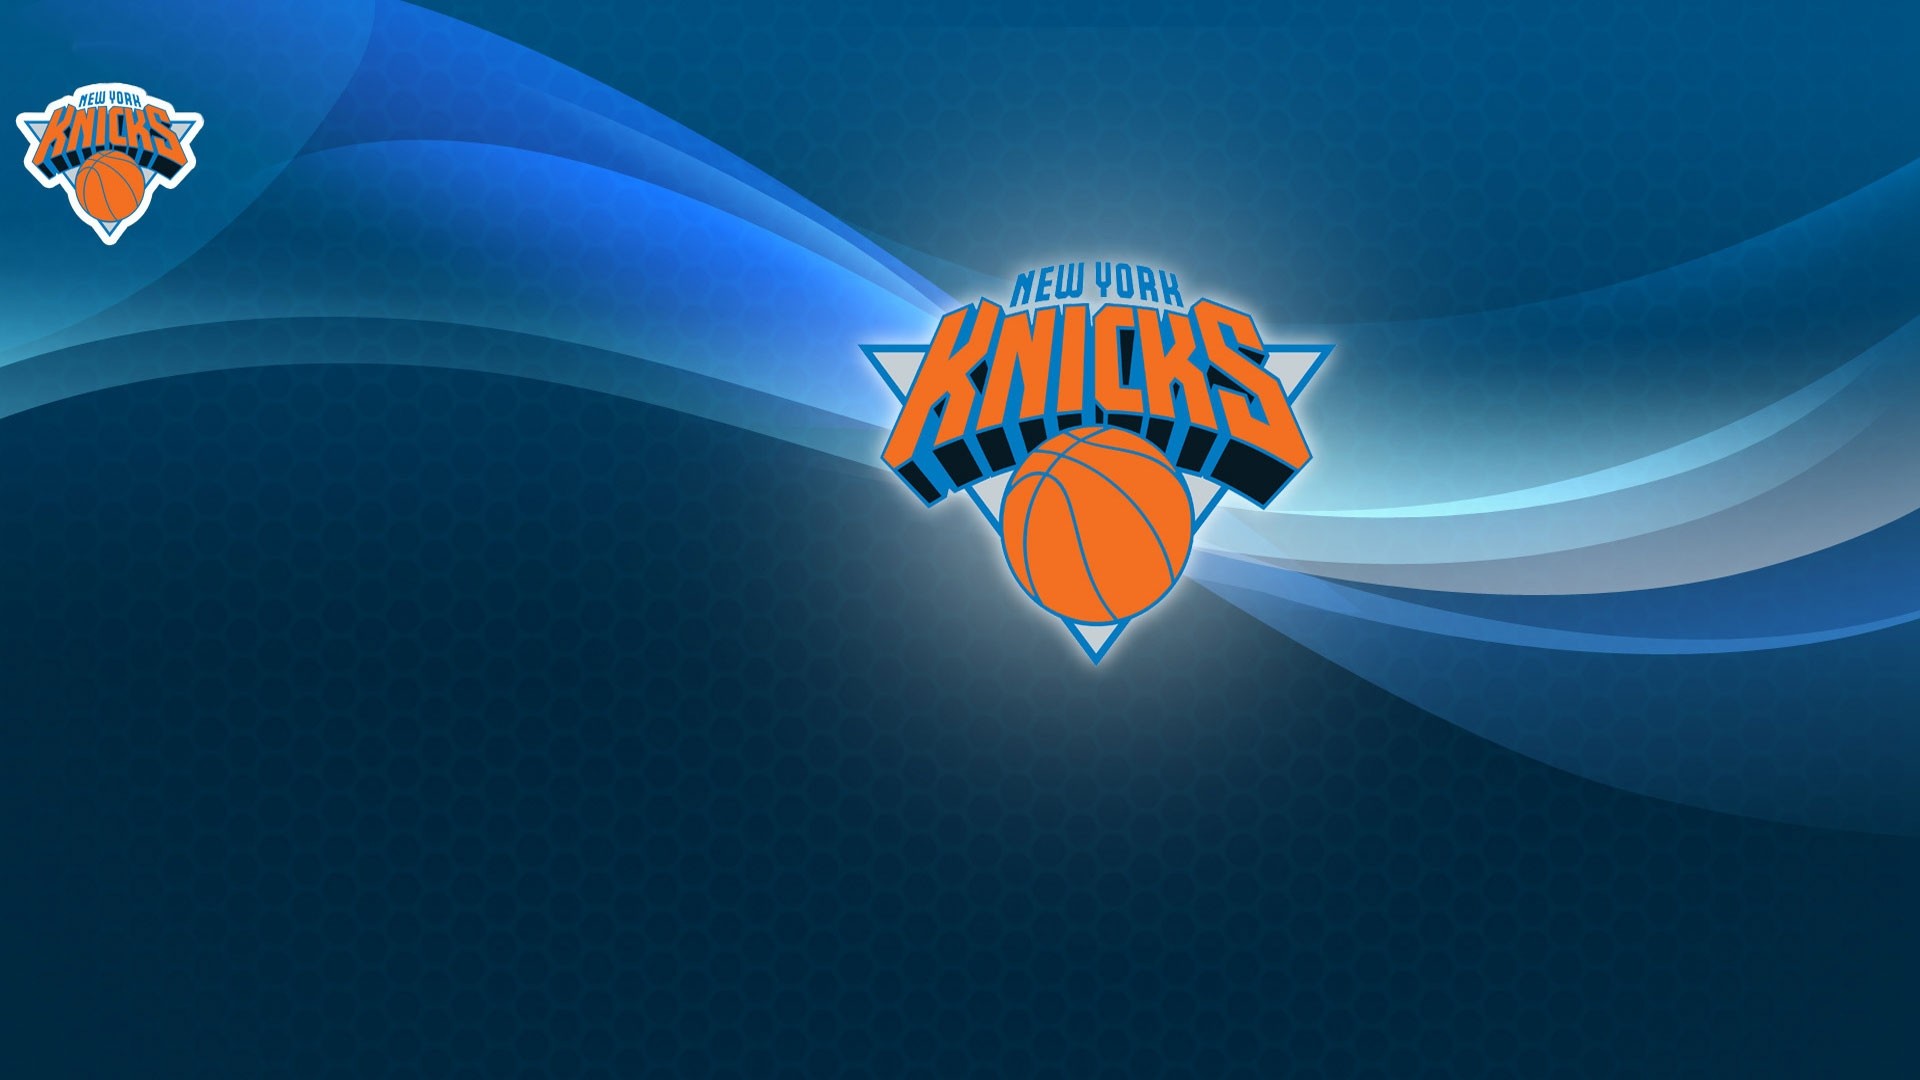 HD Desktop Wallpaper New York Knicks with image dimensions 1920x1080 pixel. You can make this wallpaper for your Desktop Computer Backgrounds, Windows or Mac Screensavers, iPhone Lock screen, Tablet or Android and another Mobile Phone device